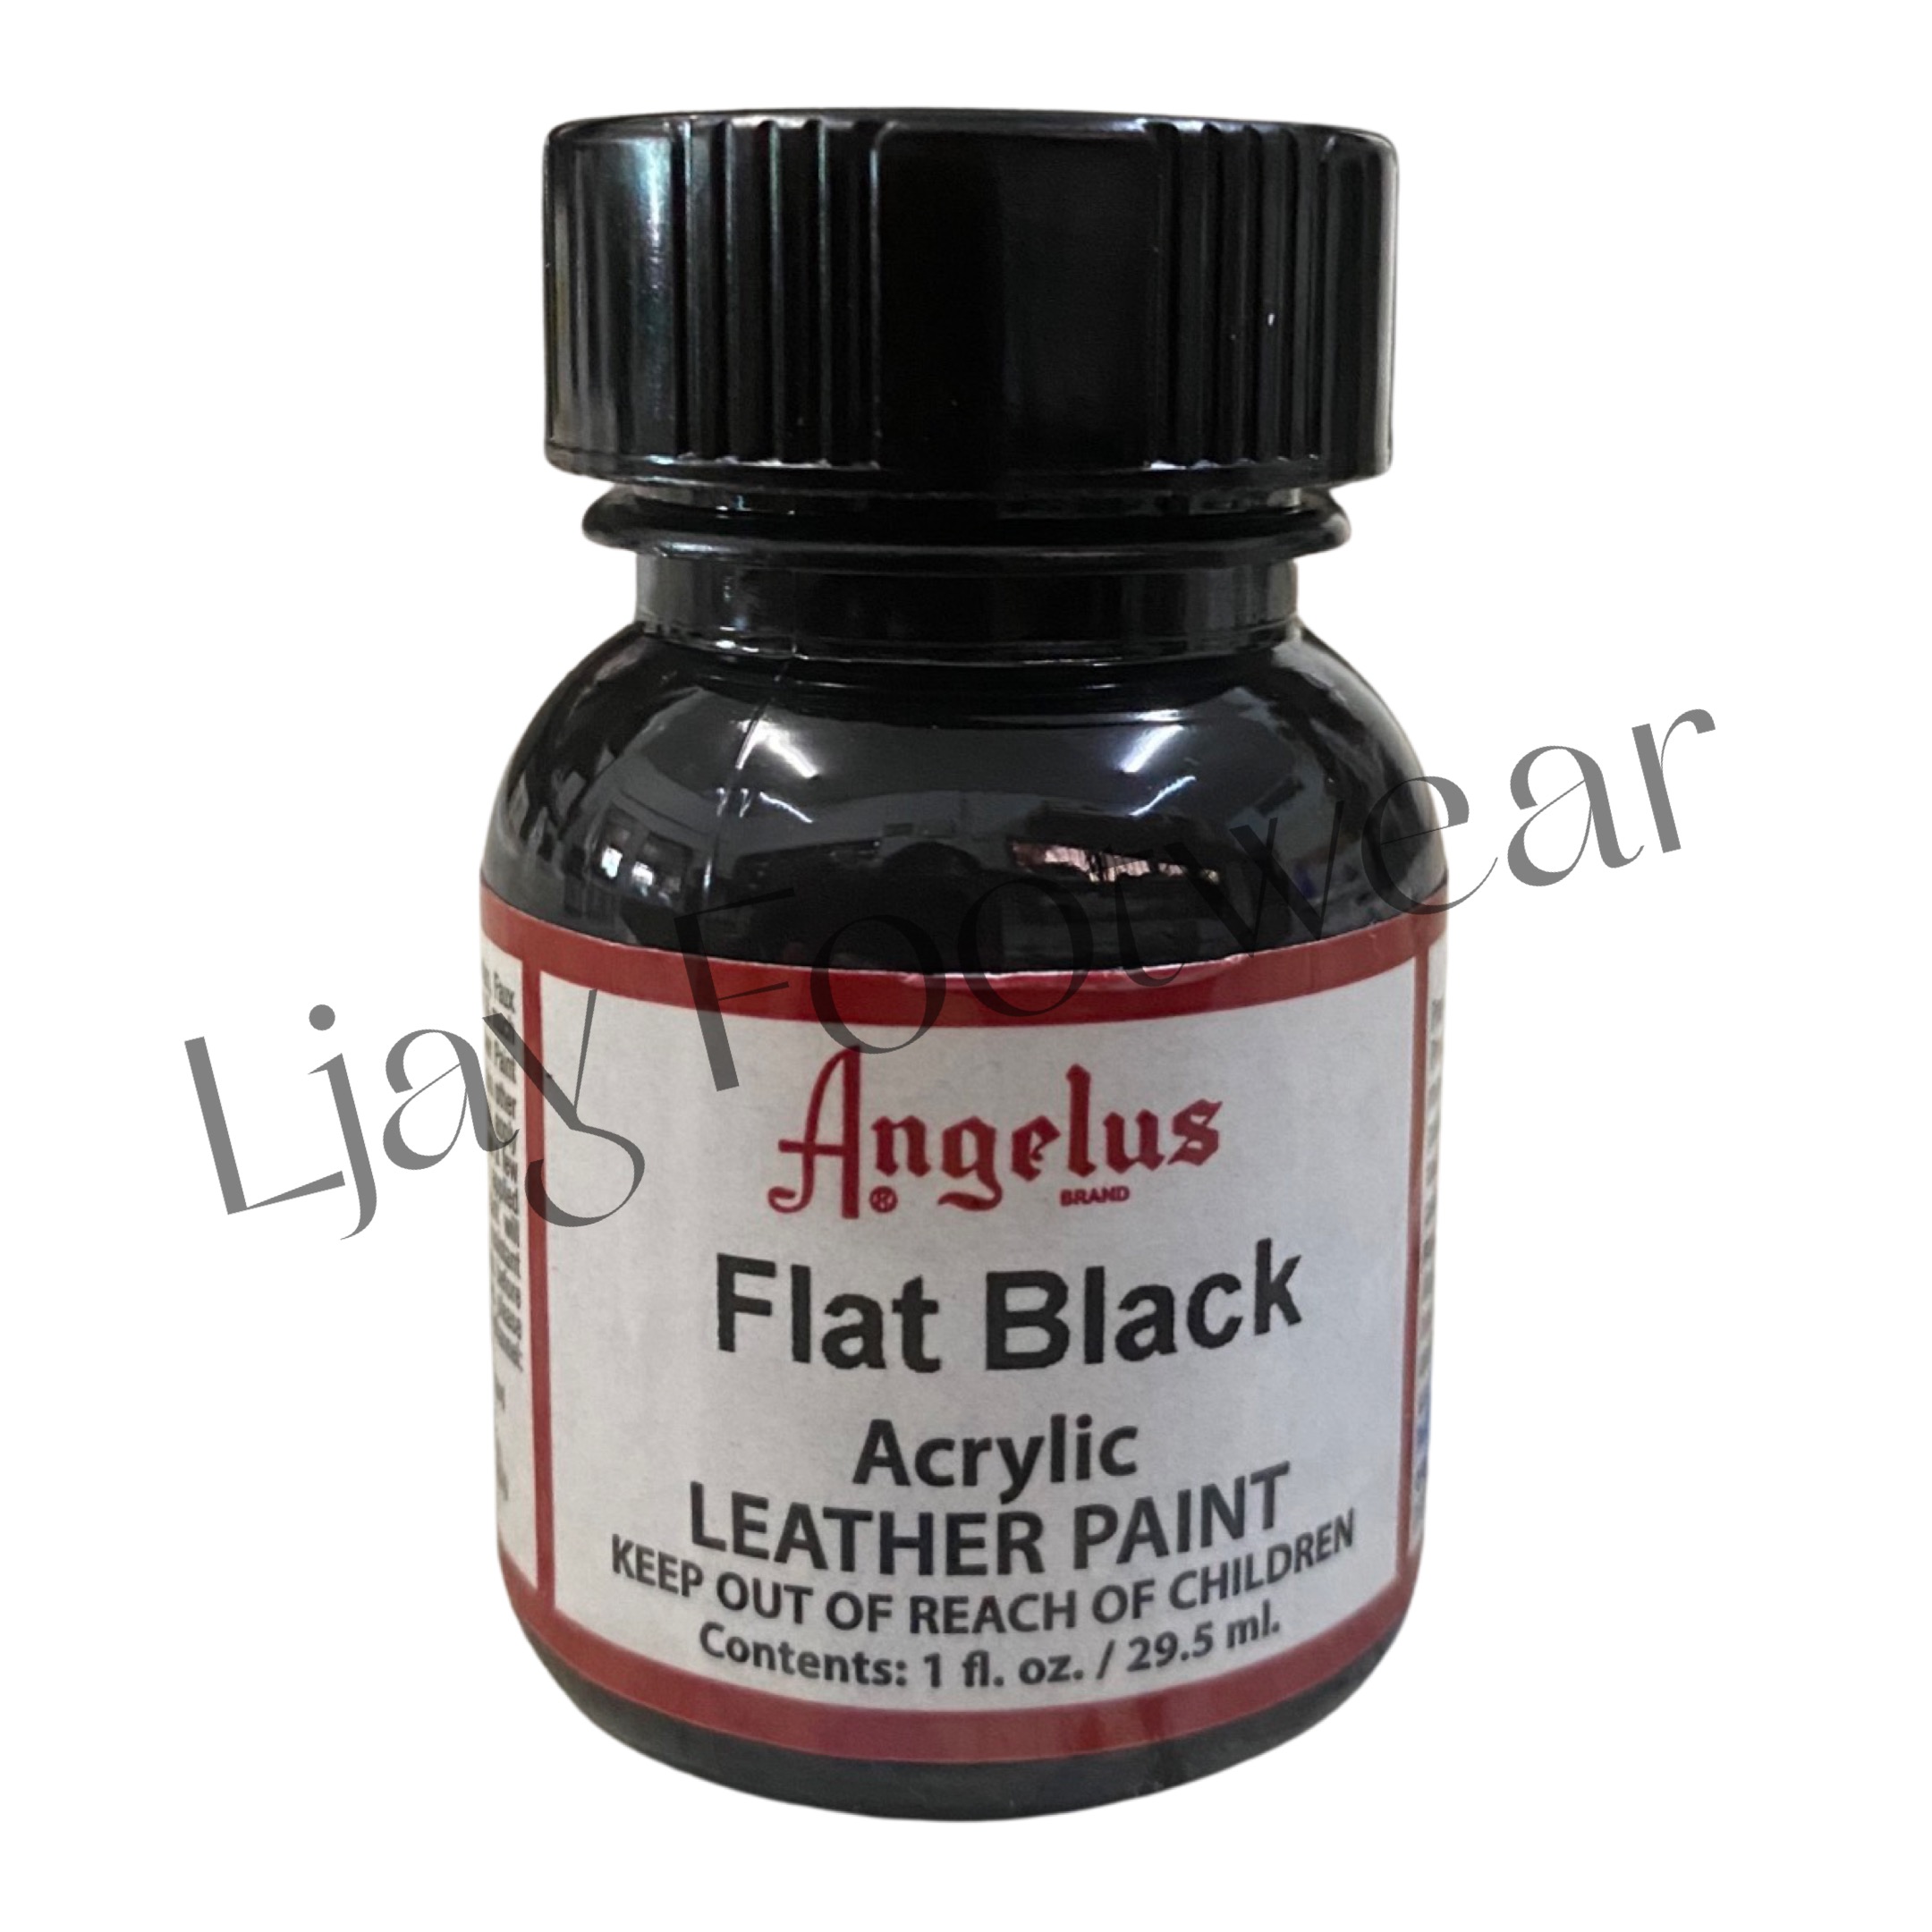 Angelus Matte Acrylic Finisher for your Newly Painted Leather Item